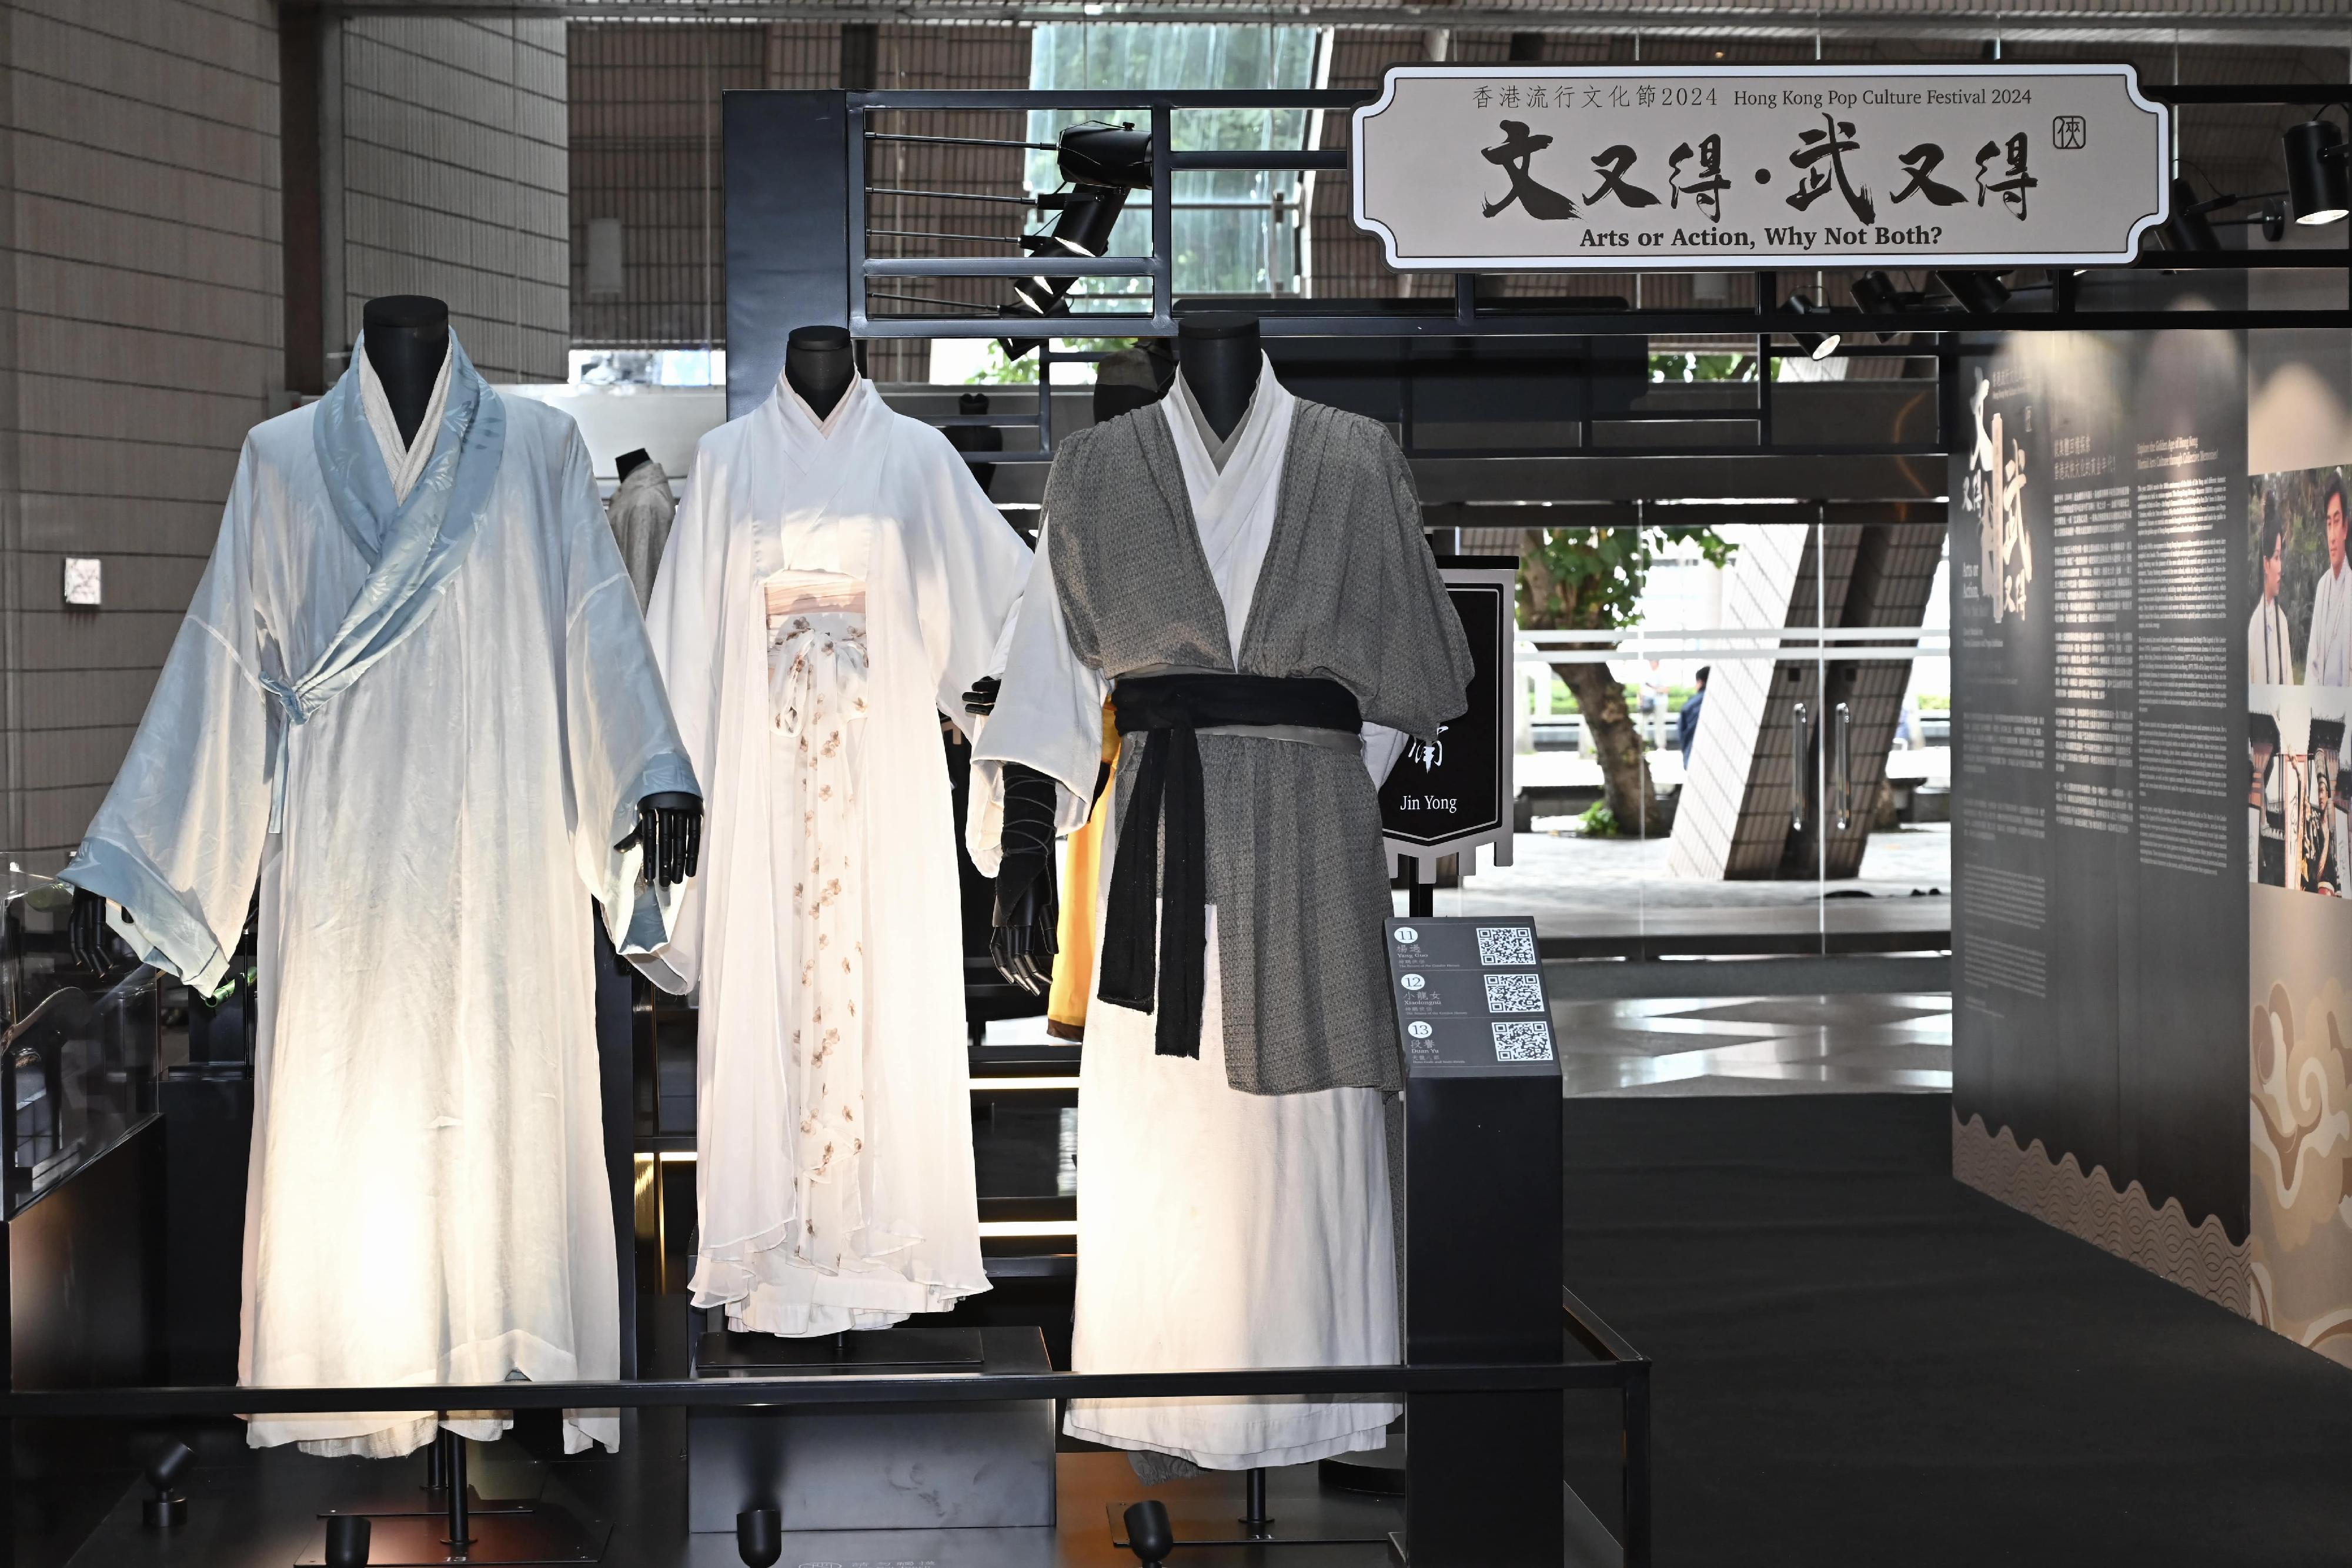 To tie in with its theme "Arts and Action", the second Hong Kong Pop Culture Festival is running a vast range of programmes inspired by martial arts novels. Among them is the "Classic Martial Arts Drama Costumes and Props Exhibition" under the "Arts or Action, Why Not Both?" series, which opened today (April 17) at the foyer of the Hong Kong Cultural Centre. Photo shows the costumes of Yang Guo (right) and Xiaolongnü (Little Dragon Maiden) (centre) in "The Return of the Condor Heroes", and Duan Yu (left) in "Demi-Gods and Semi-Devils". 